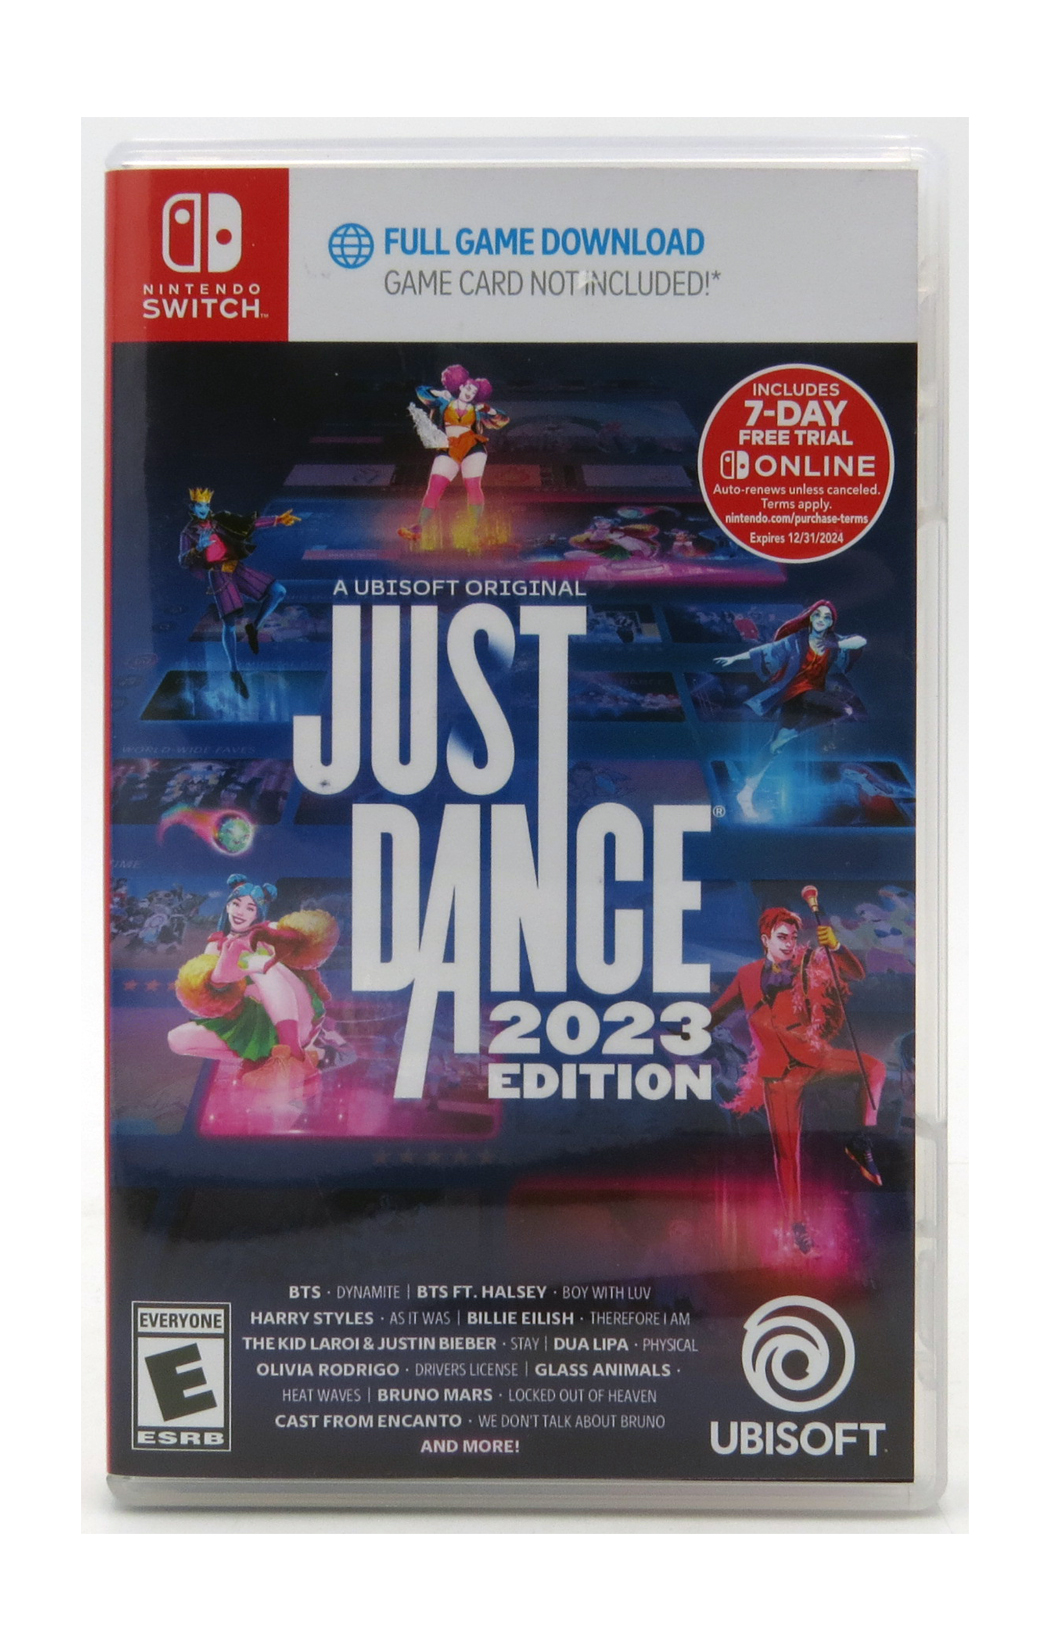 Game Dance Edition Original In Box 887256113834 Nintendo Code 2023 Just Package eBay Switch | in -